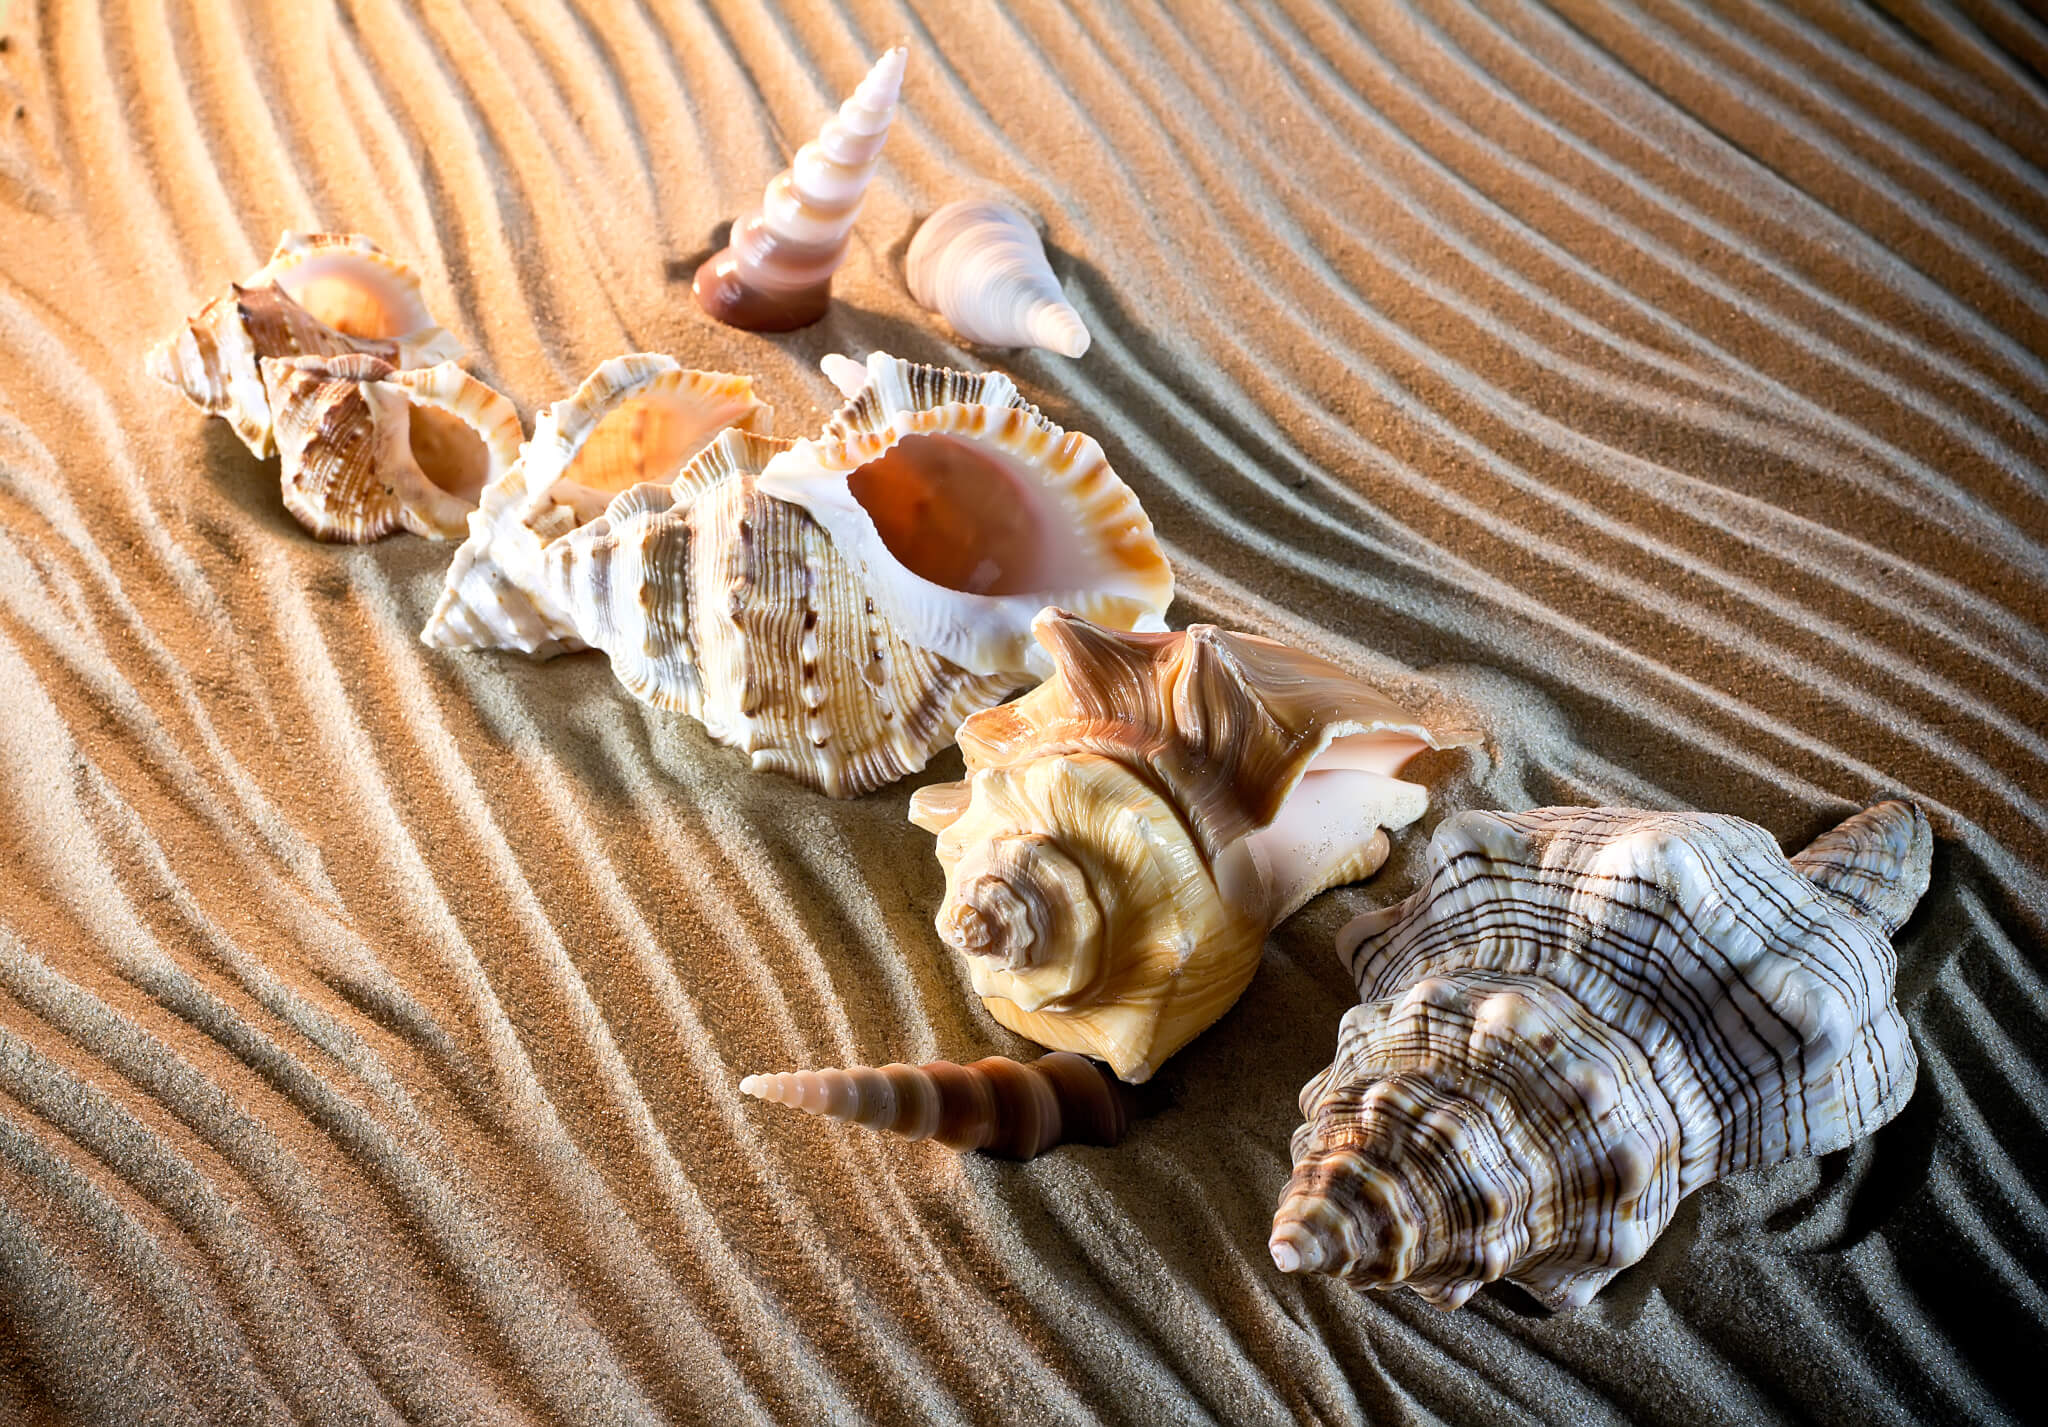 Some Amazing Facts about Seashells